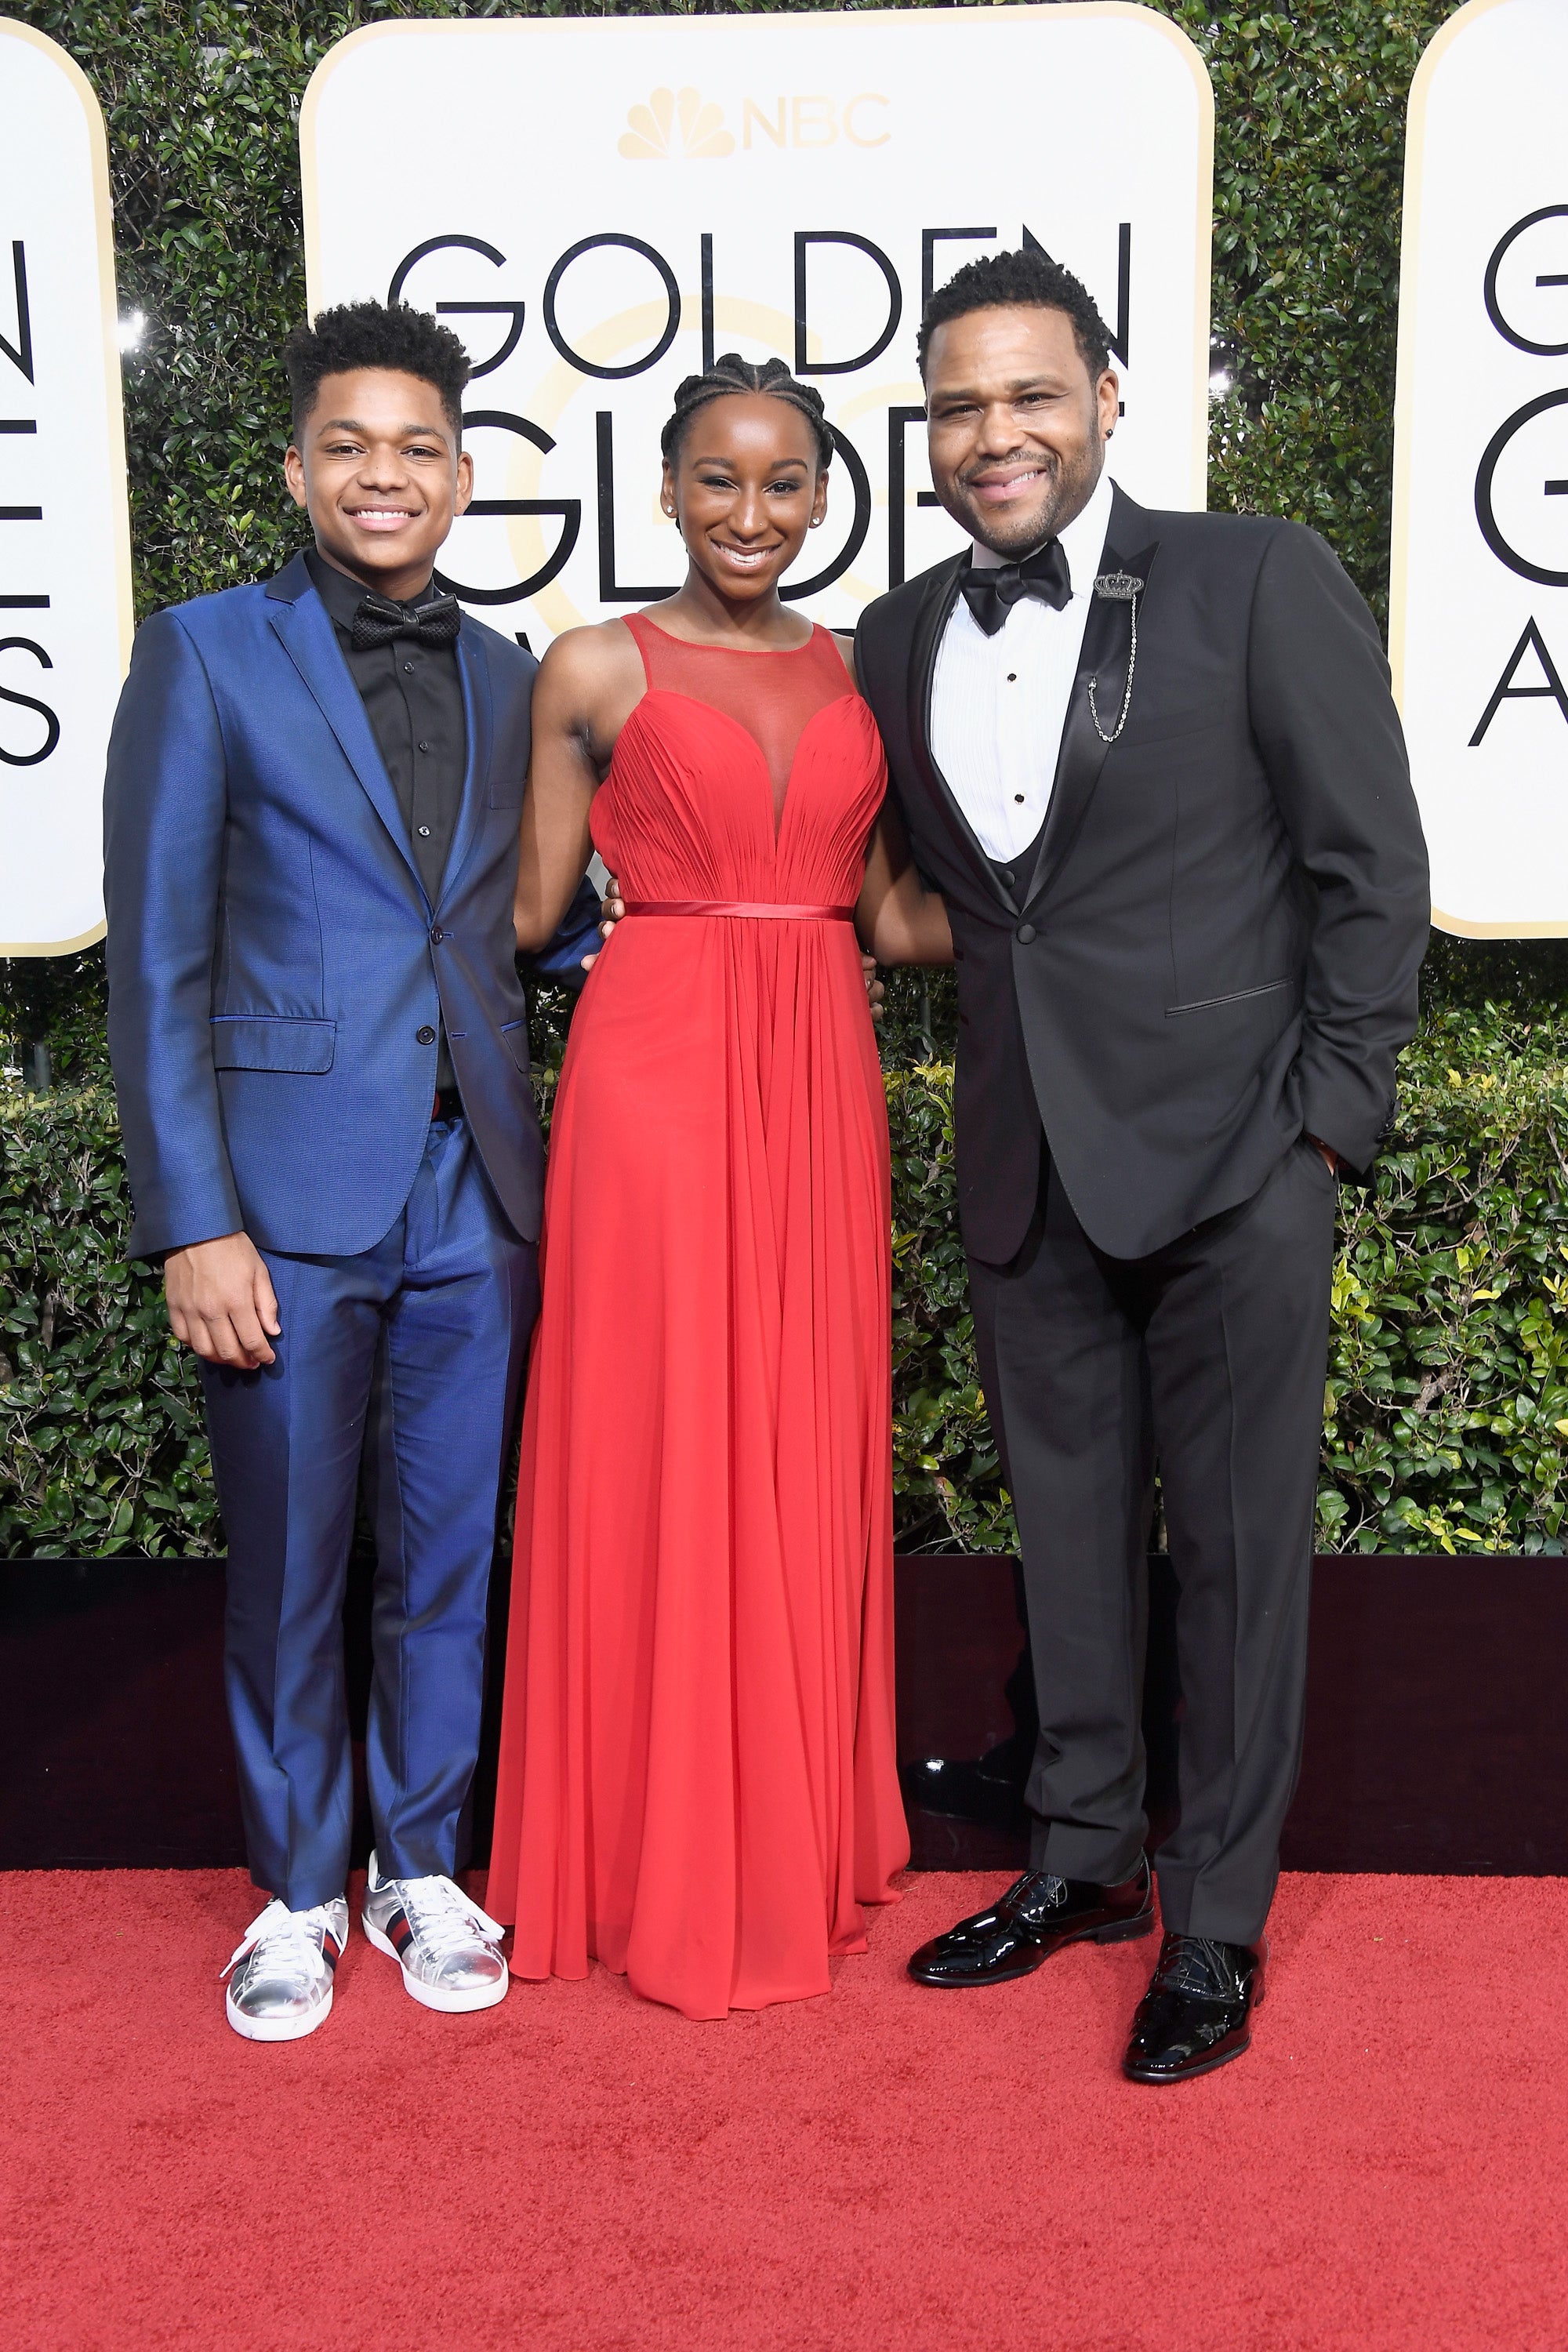 You Won't Believe How On Fire the Golden Globes Red Carpet Was
